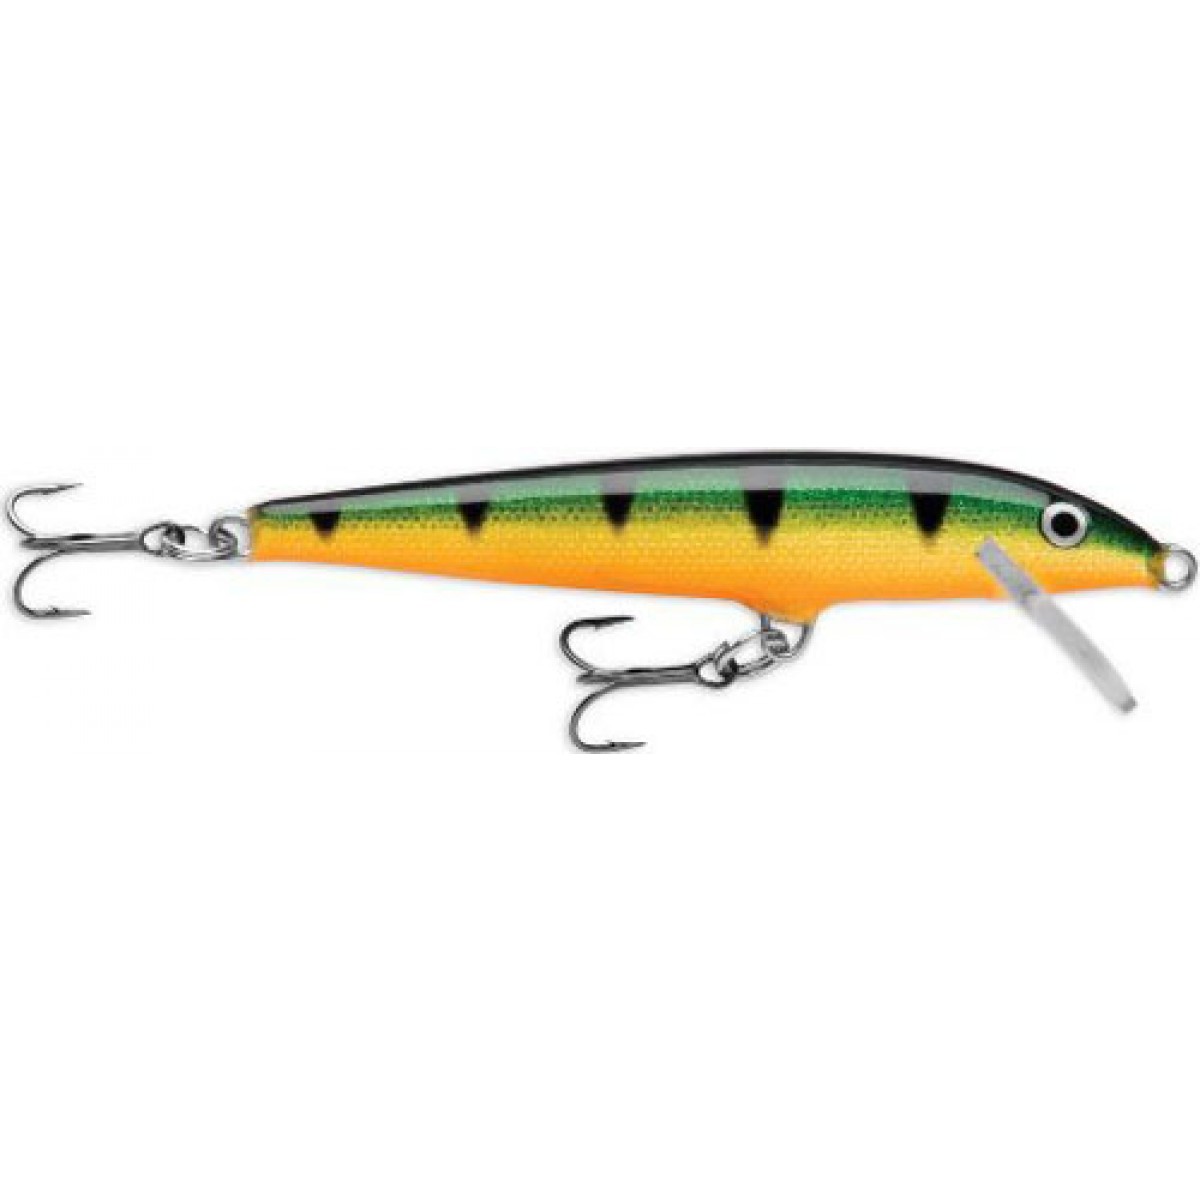 3 Rapala Original Floating Firetiger F13 FT Salmon Trout Pike Perch Bass Lures 